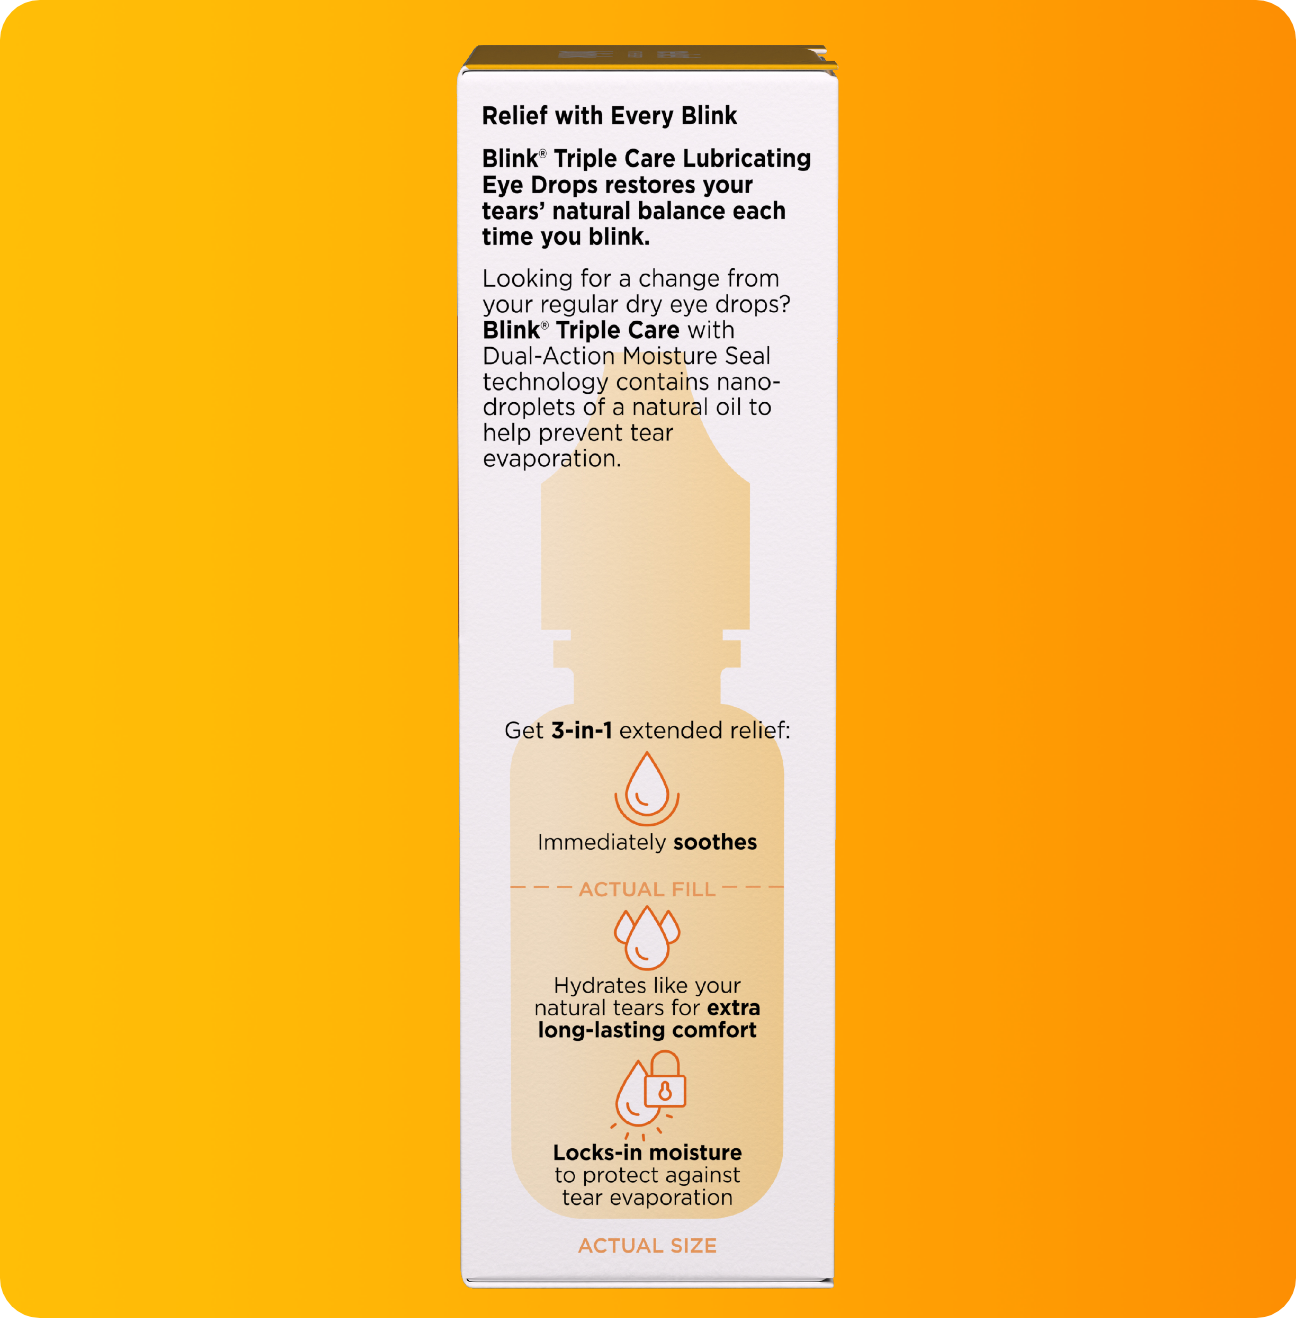 Blink Triple Care carton with product summary